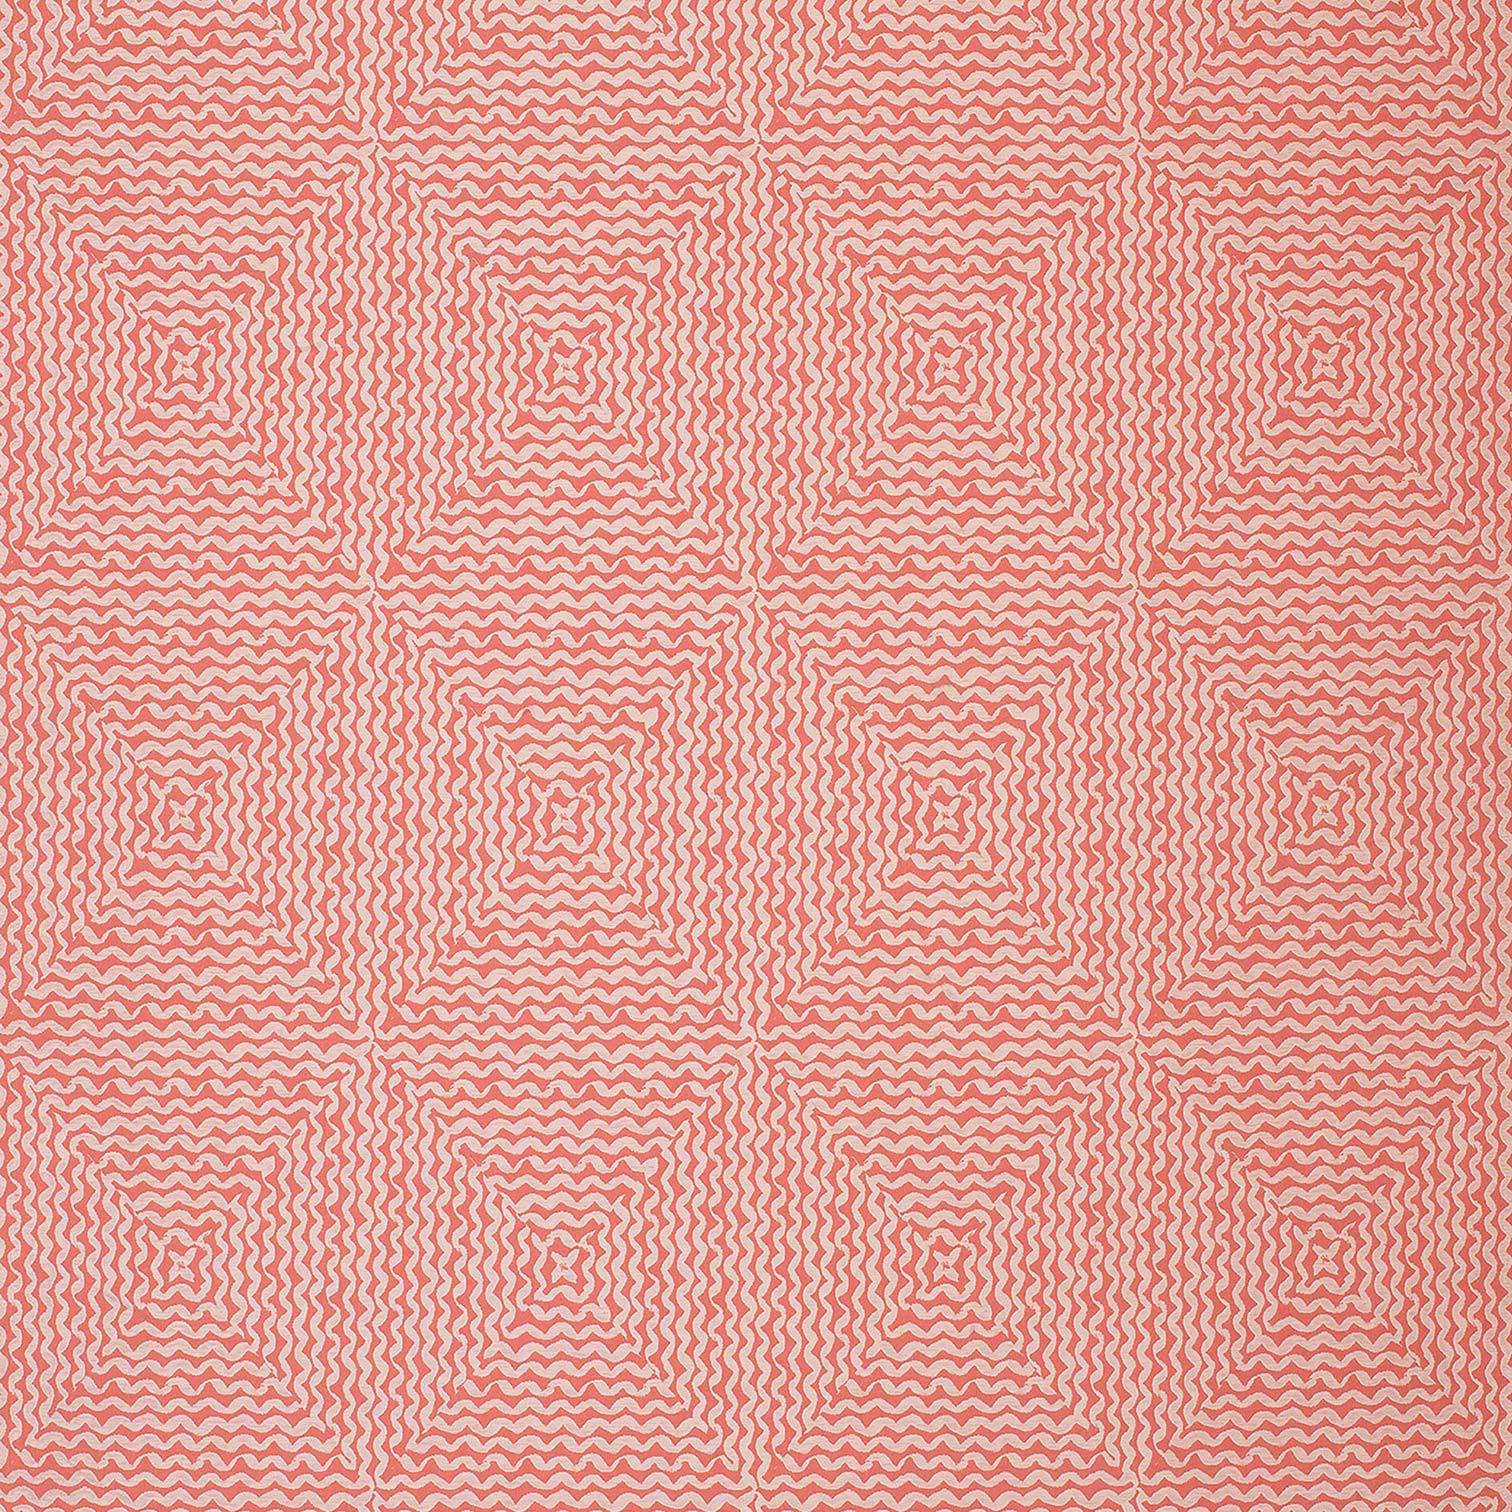 Nina Campbell Fabric - Les Rêves Mourlot Coral NCF4293-01